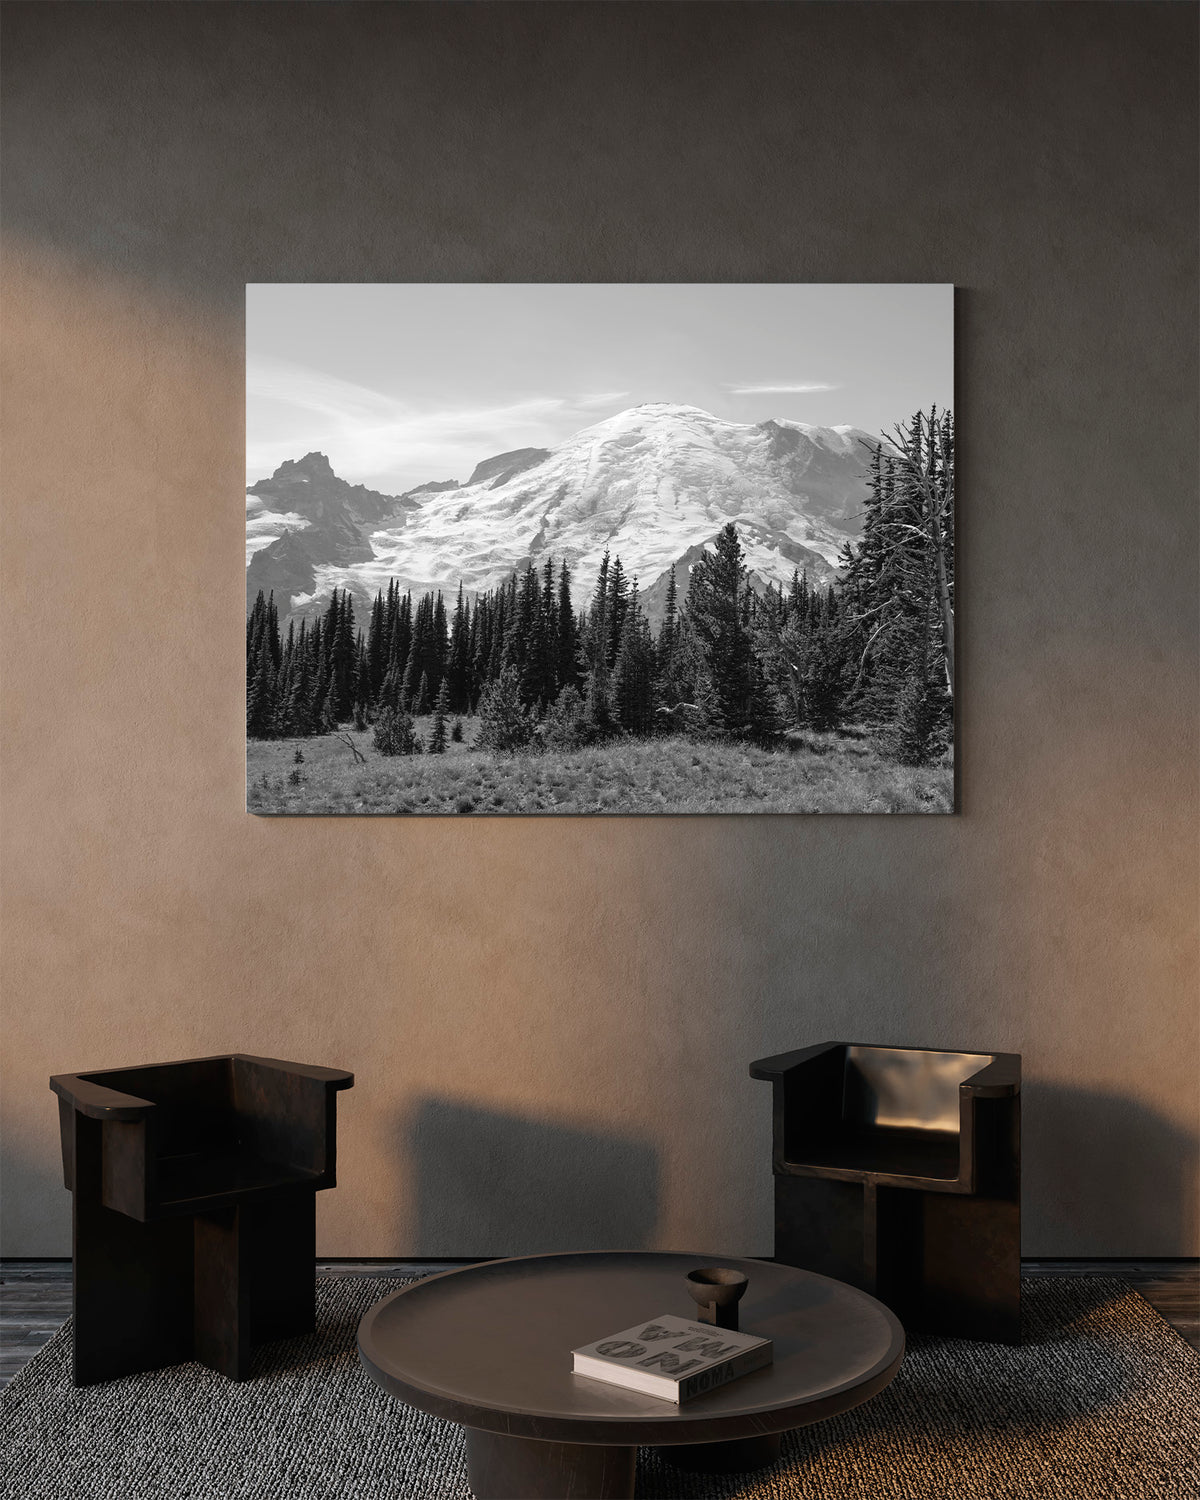 The Mt. Rainier experience is impressive. If in Washington State, a must-have visit if possible. Hopefully, this black and white image will bring you closer to that in-person visit. Printed as a 36x24 inch image on polycotton canvas and hand-stretched into canvas wrap. Pine stretcher bars are used for the wrap. Each wrap is made to order and printed on our HP Latex printers.